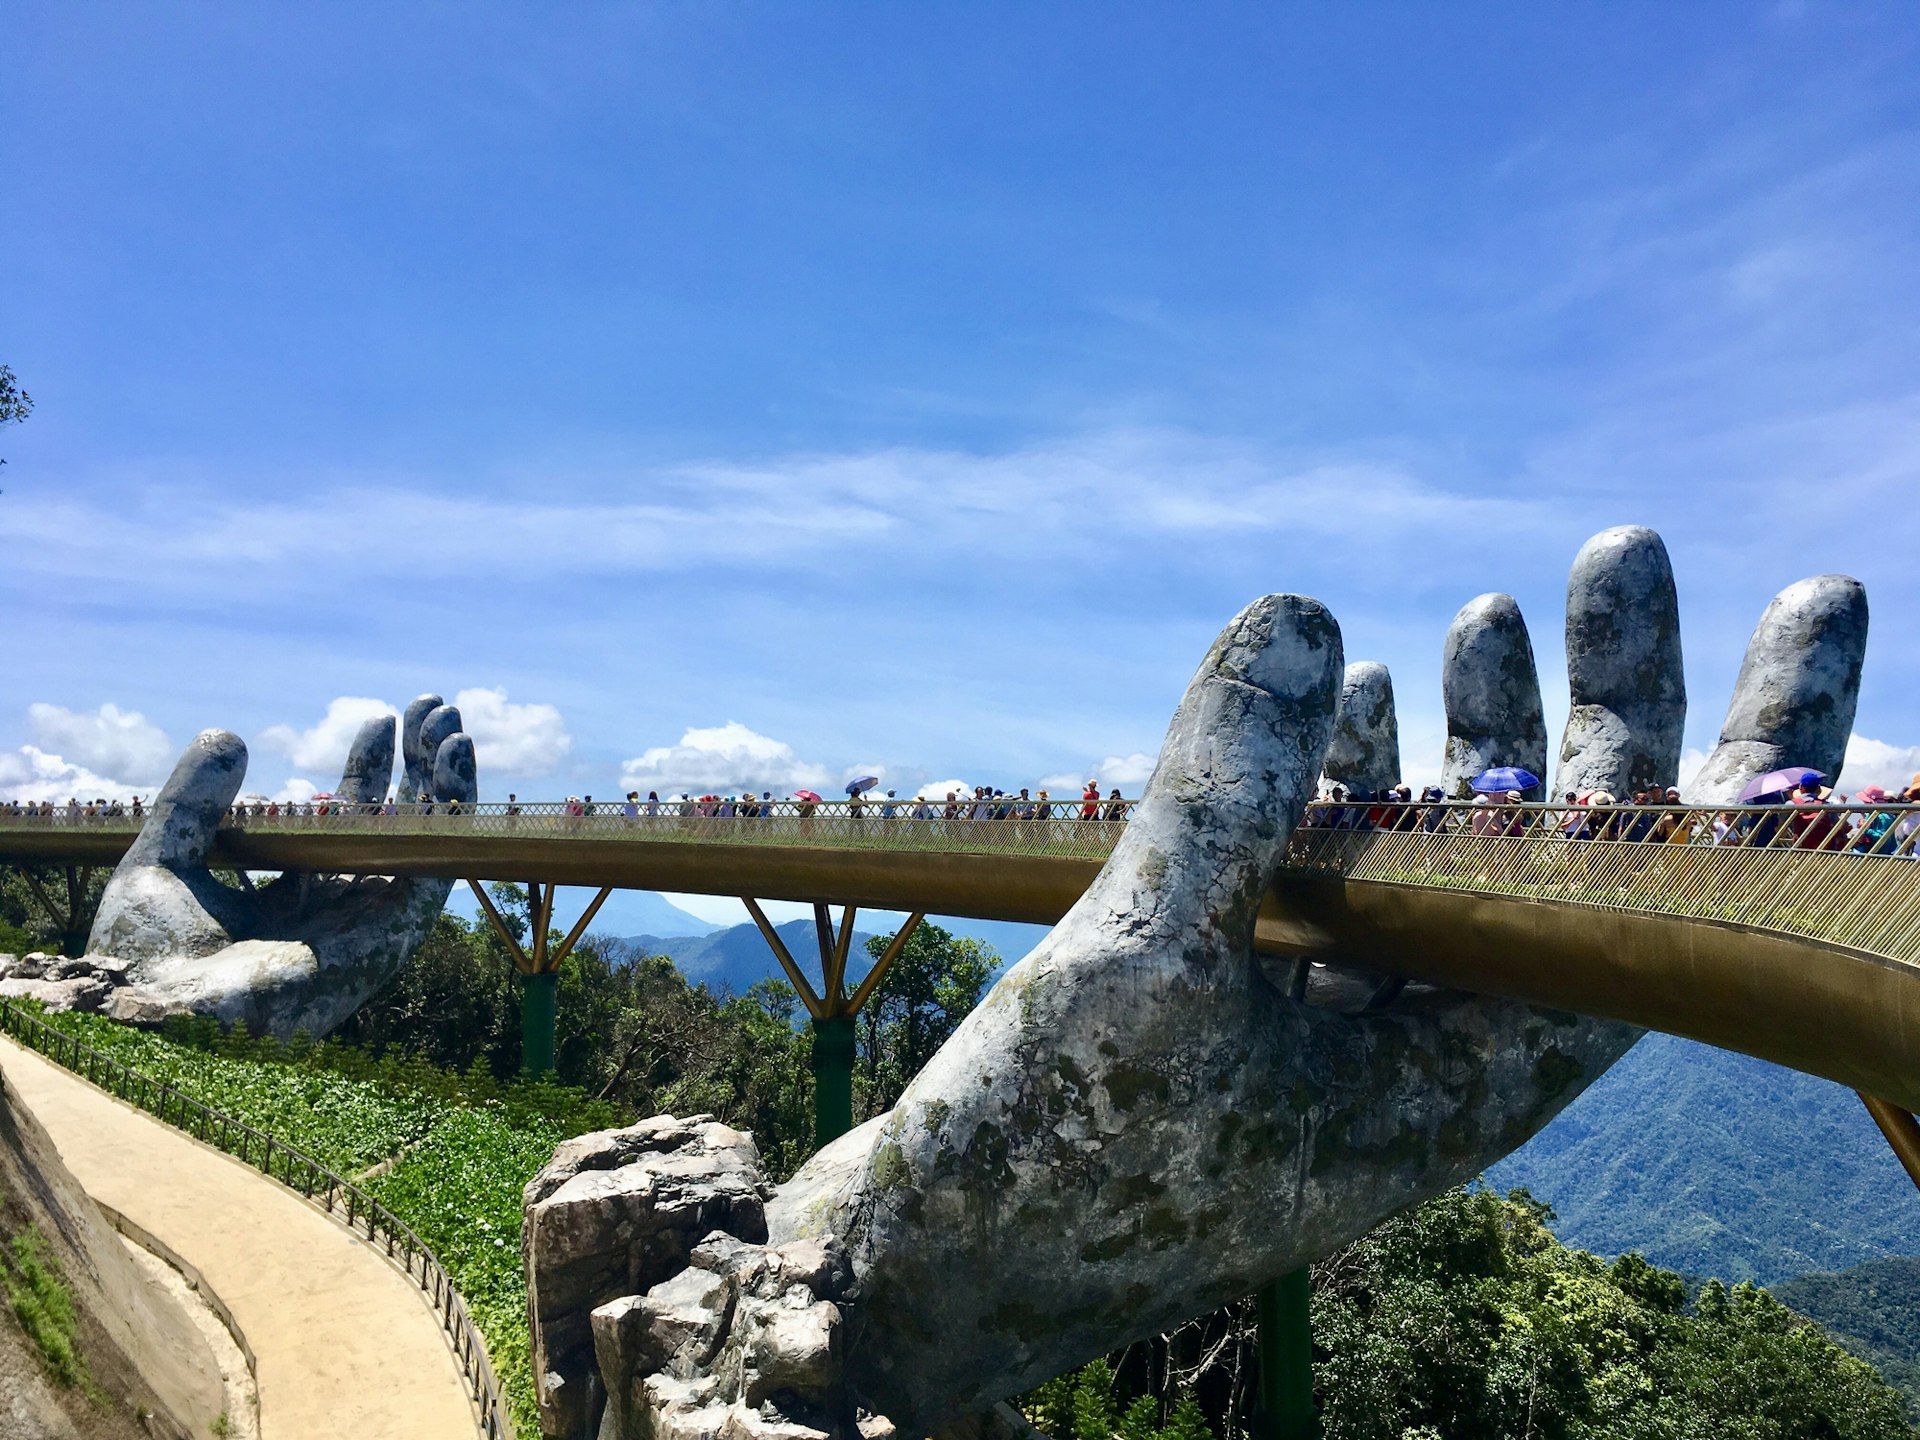 People walk along a bridge that is supported by two giant stone hands in a mountain resort